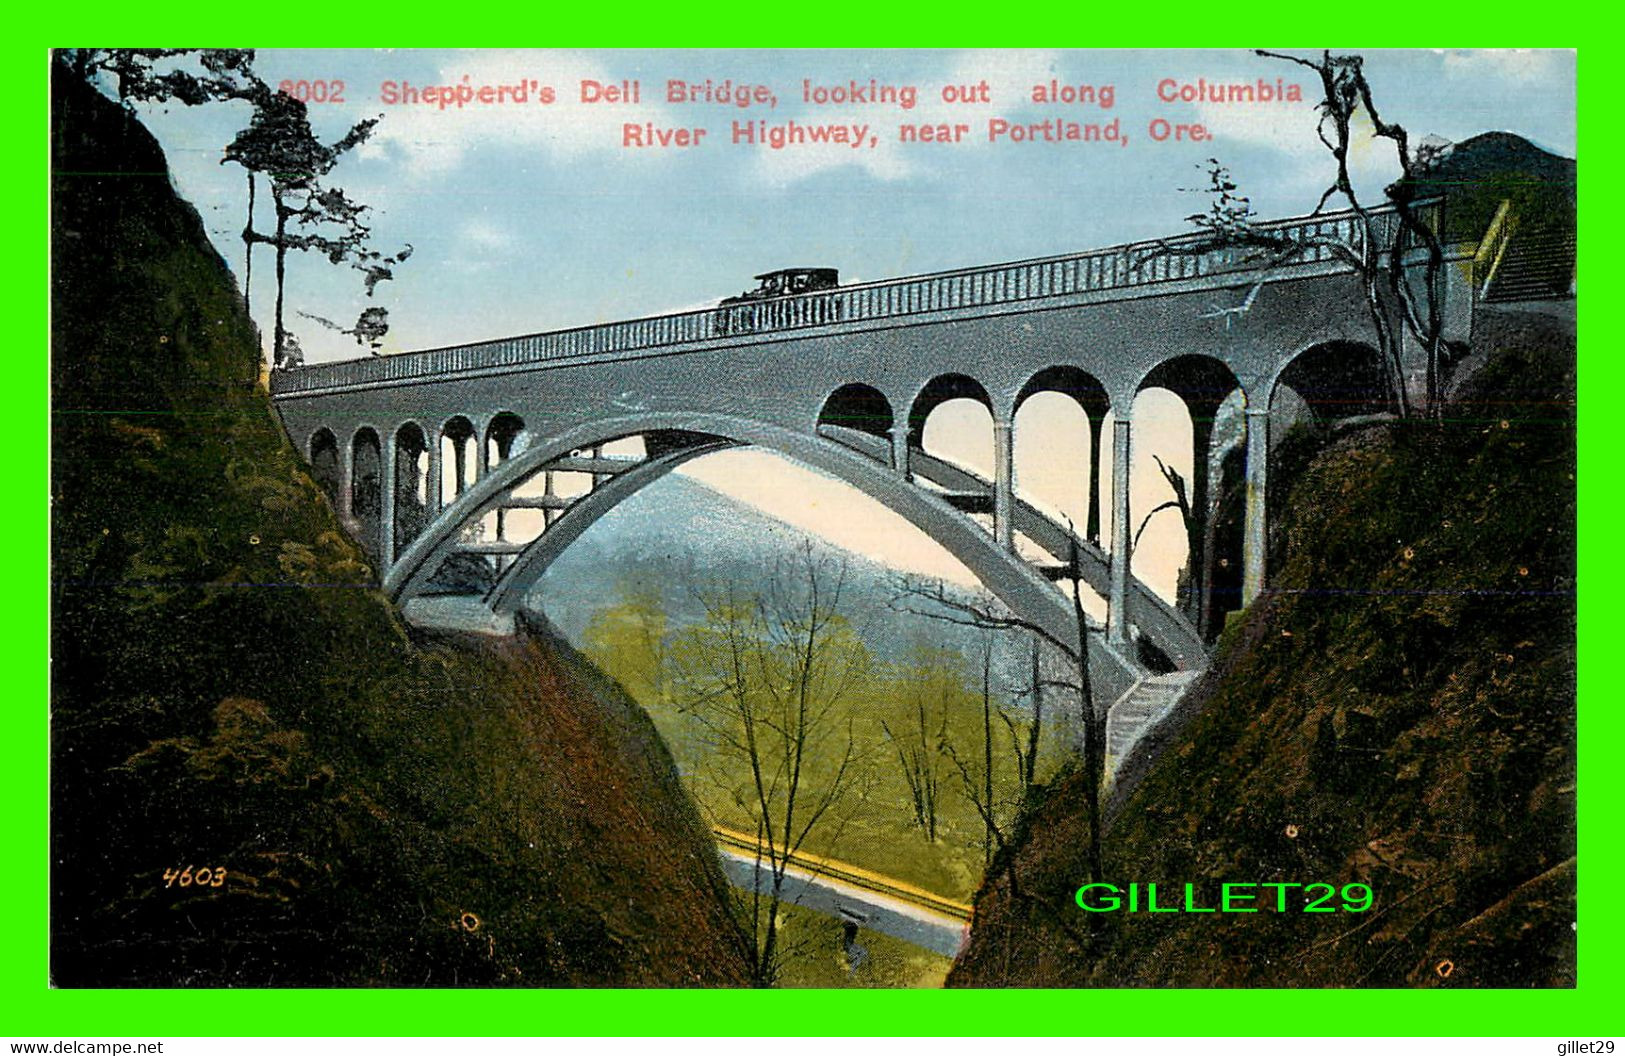 PORTLAND, OR - SHEPPERD'S DELL BRIDGE, LOOKING OUT ALONG COLUMBIA RIVER HIGHWAY - PUB, BY THE OREGON NEWS CO - - Portland